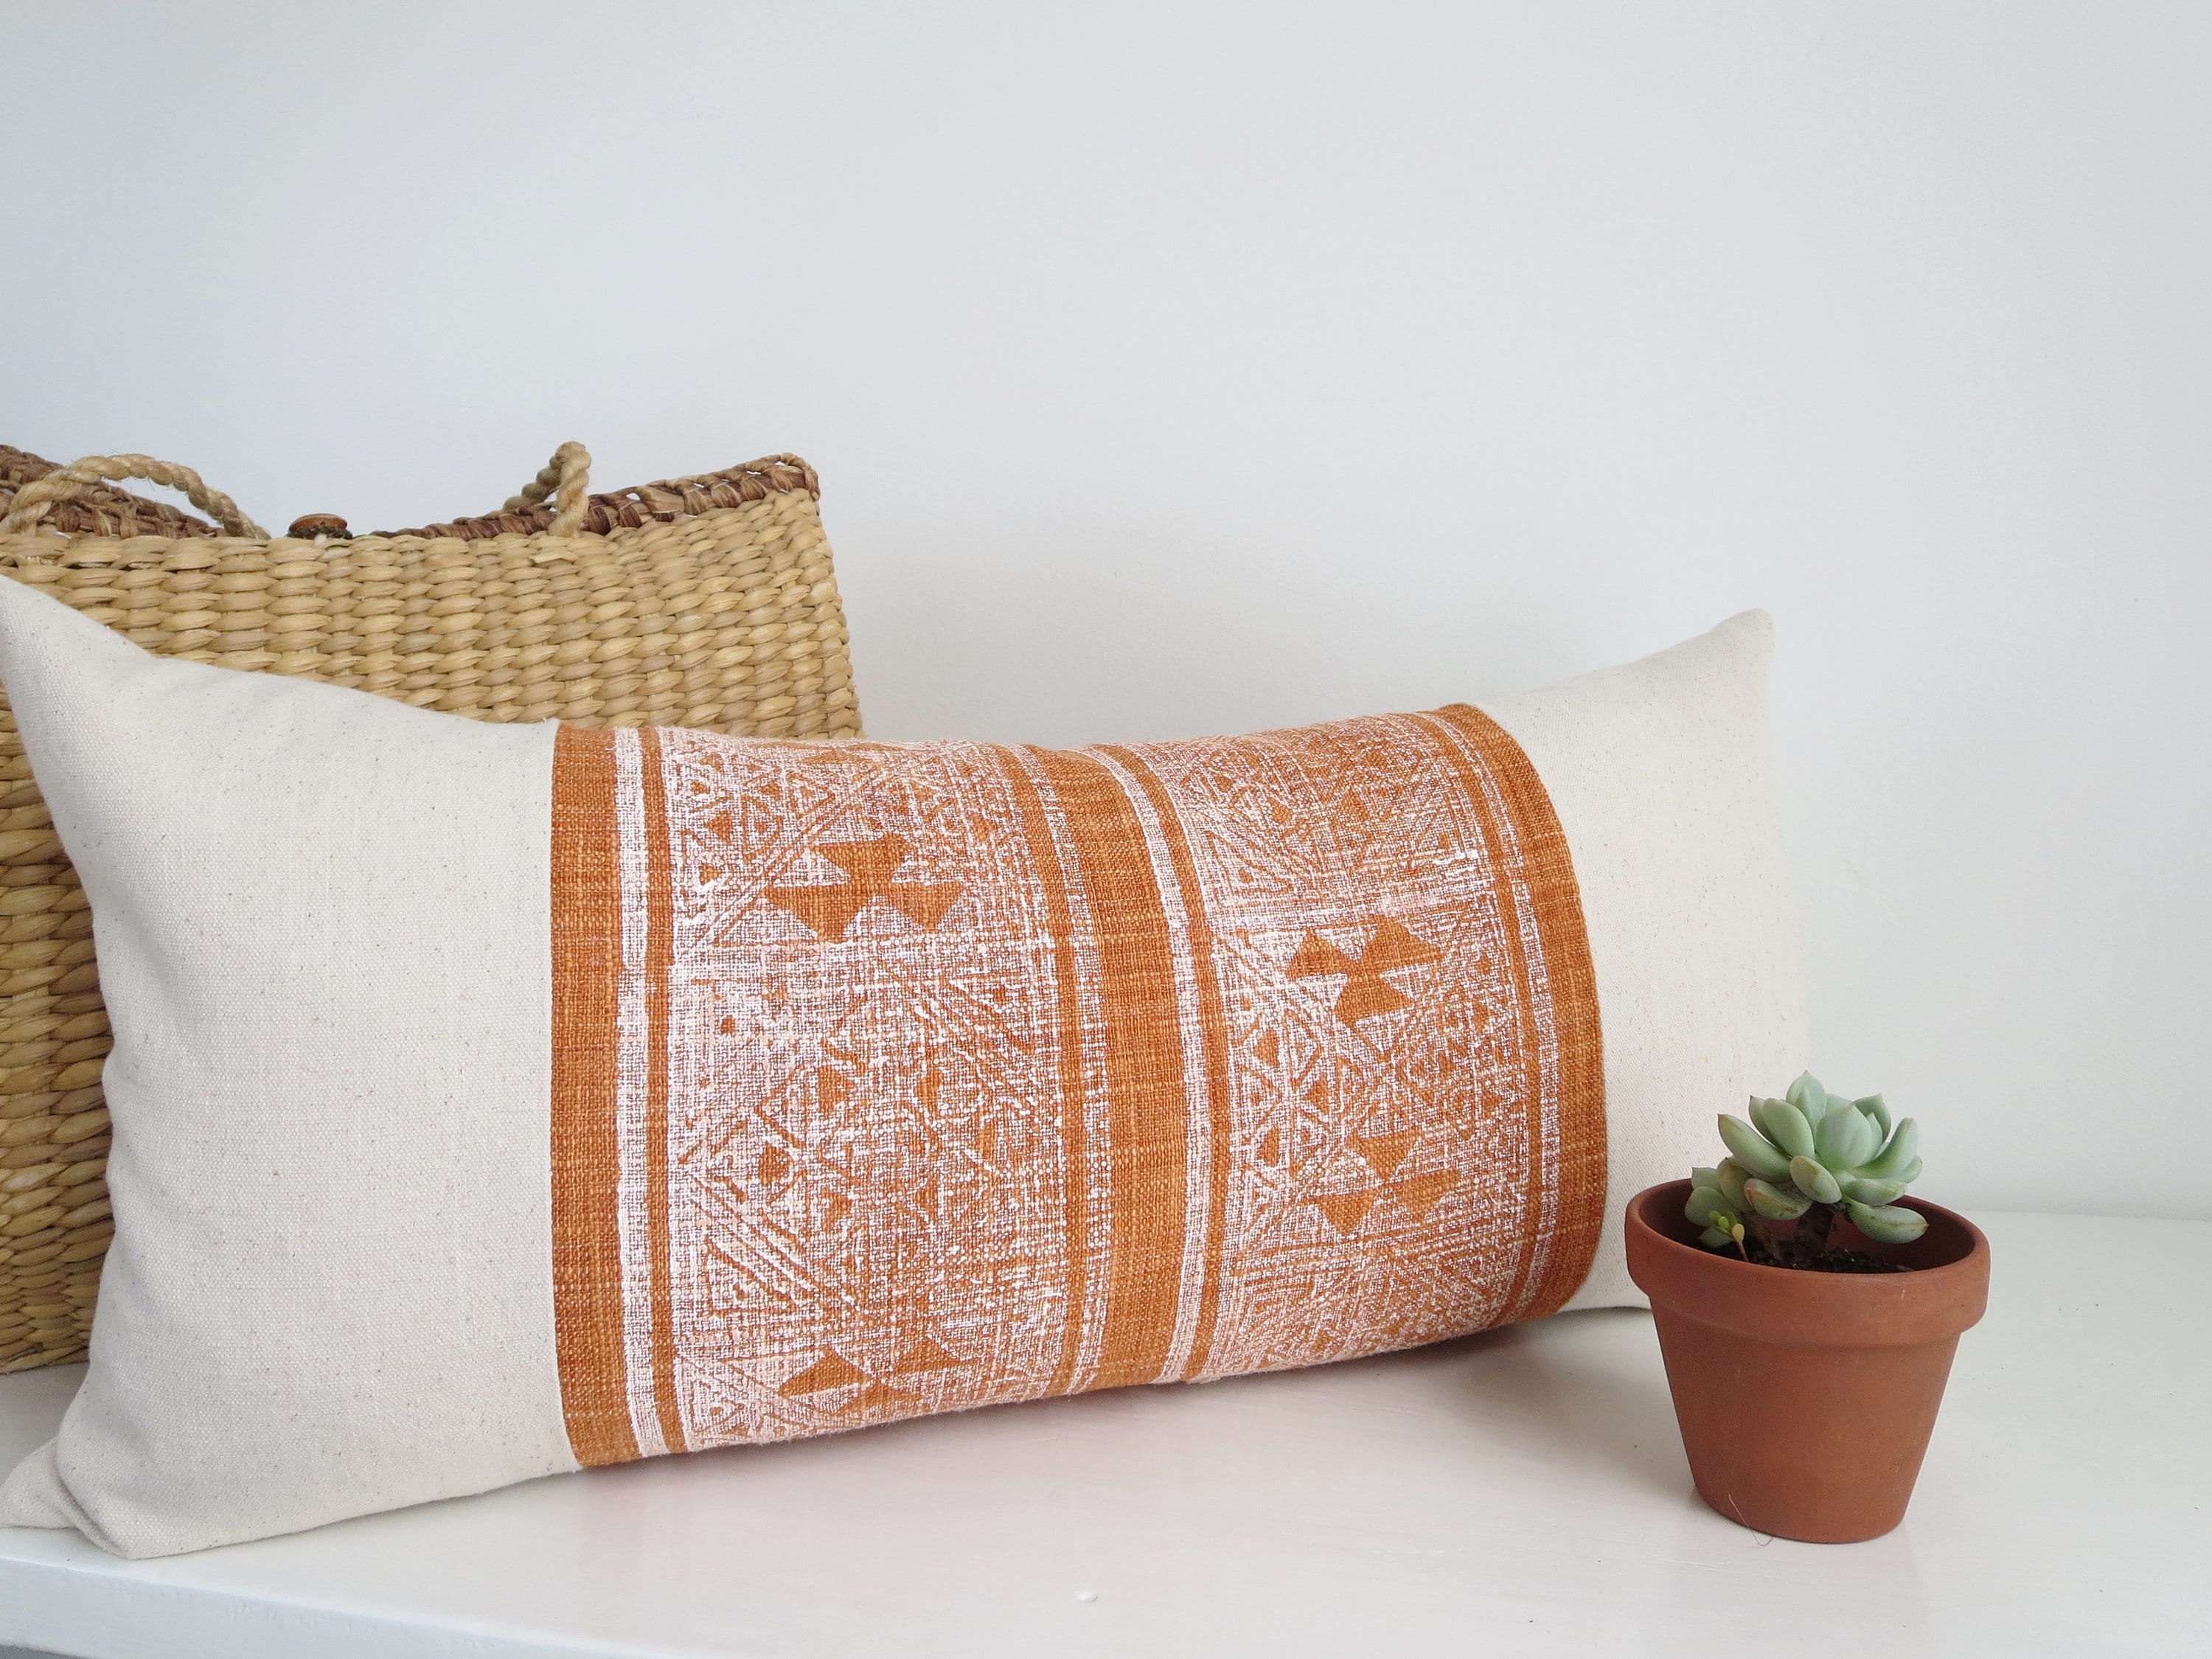 Inyahome Decorative Orange Throw Pillow Covers Pack of 1/2 Boho